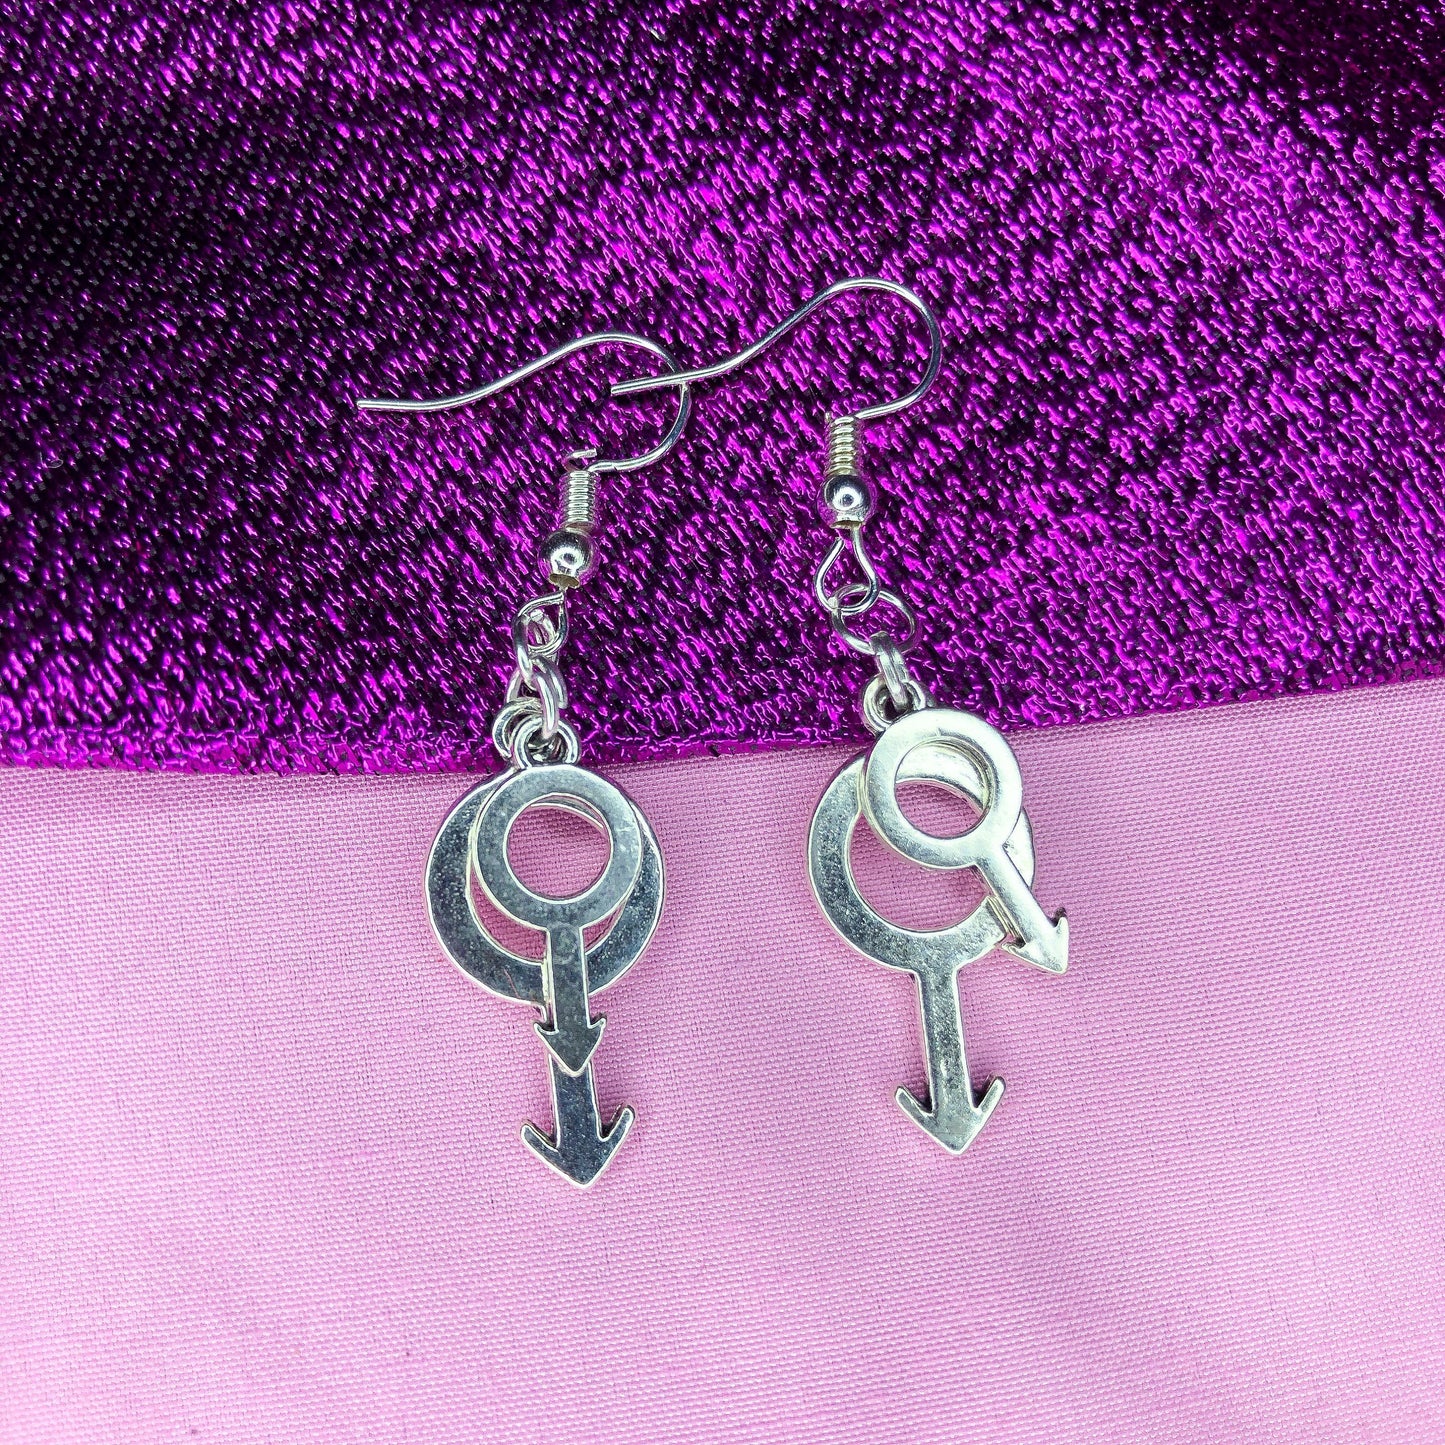 Double mars silver earrings, small and big layered charm earrings